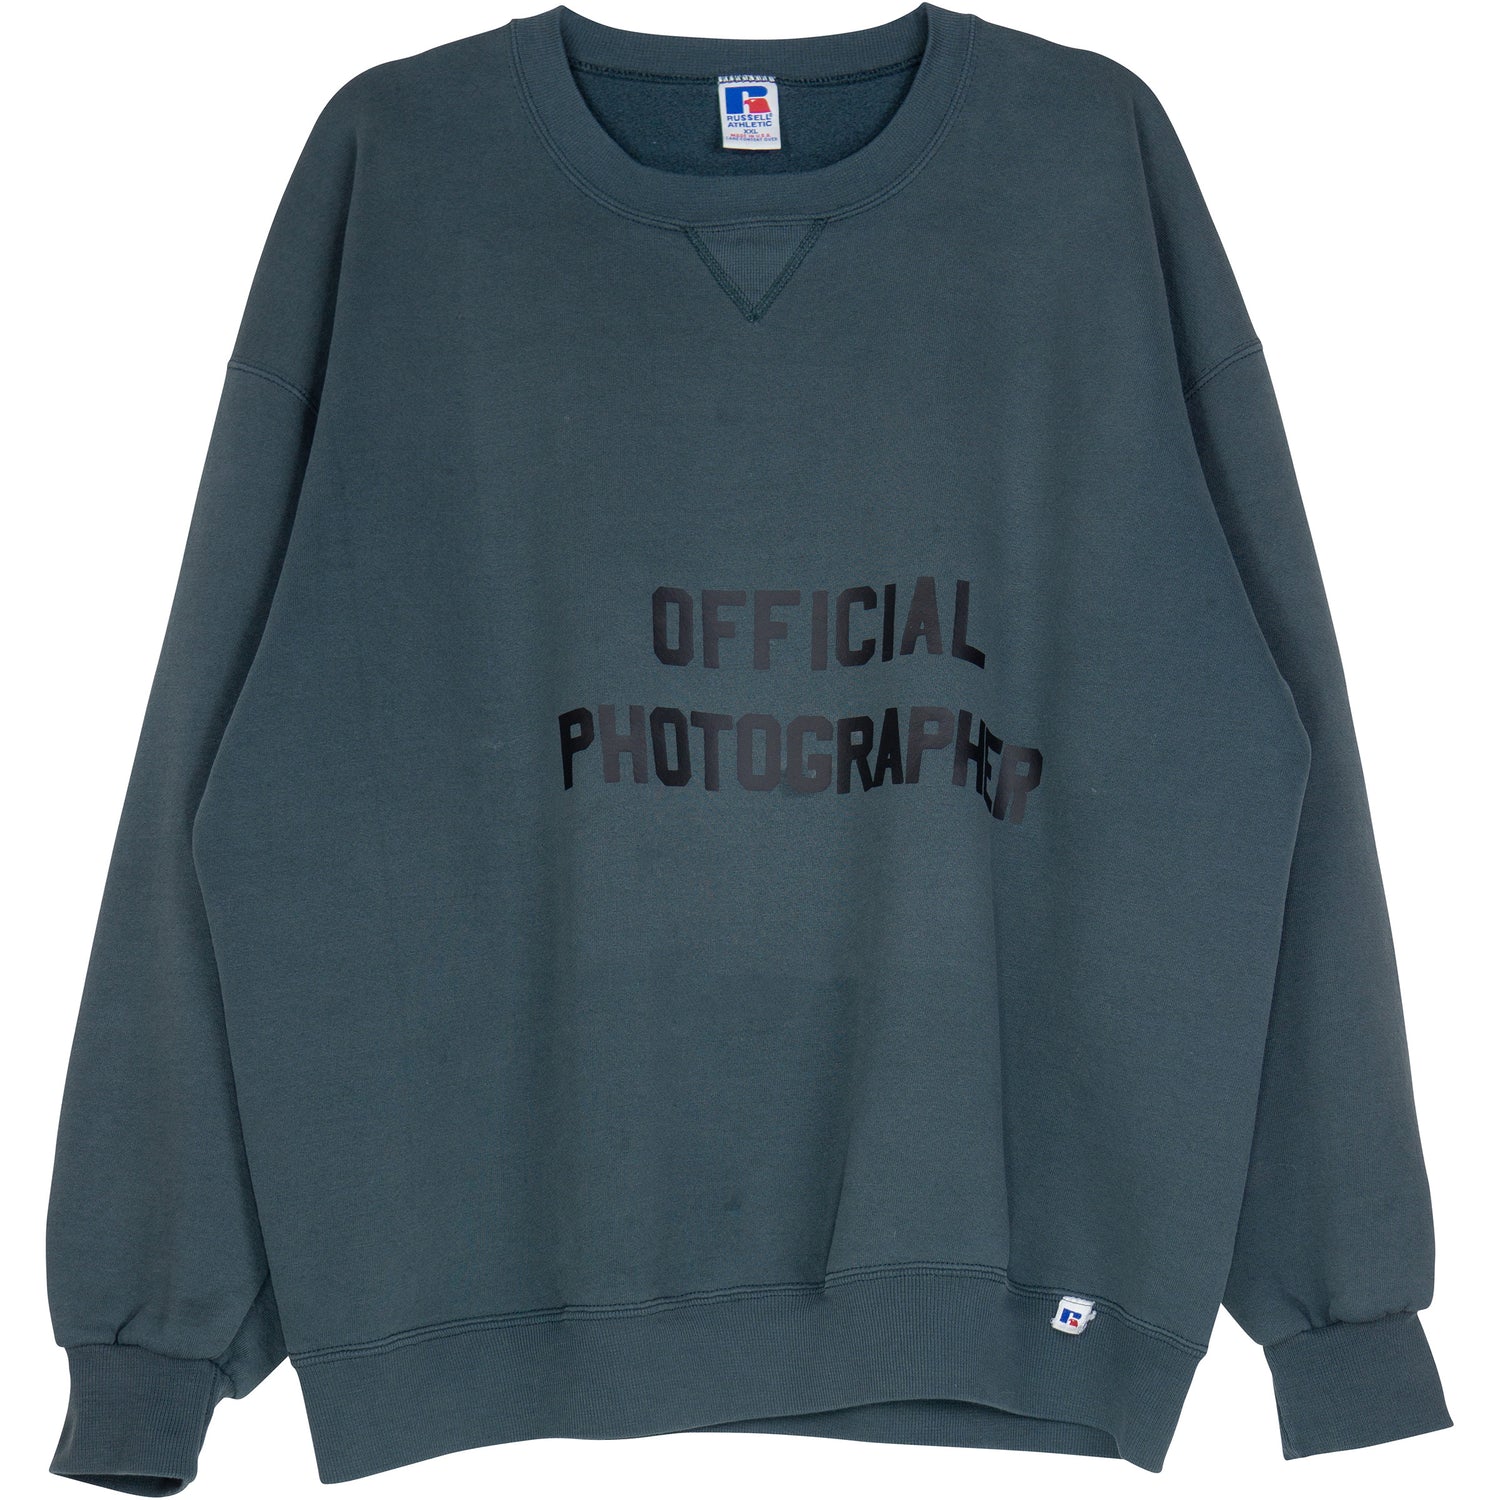 VINTAGE RUSSELL OFFICIAL PHOTOGRAPHER SWEATSHIRT